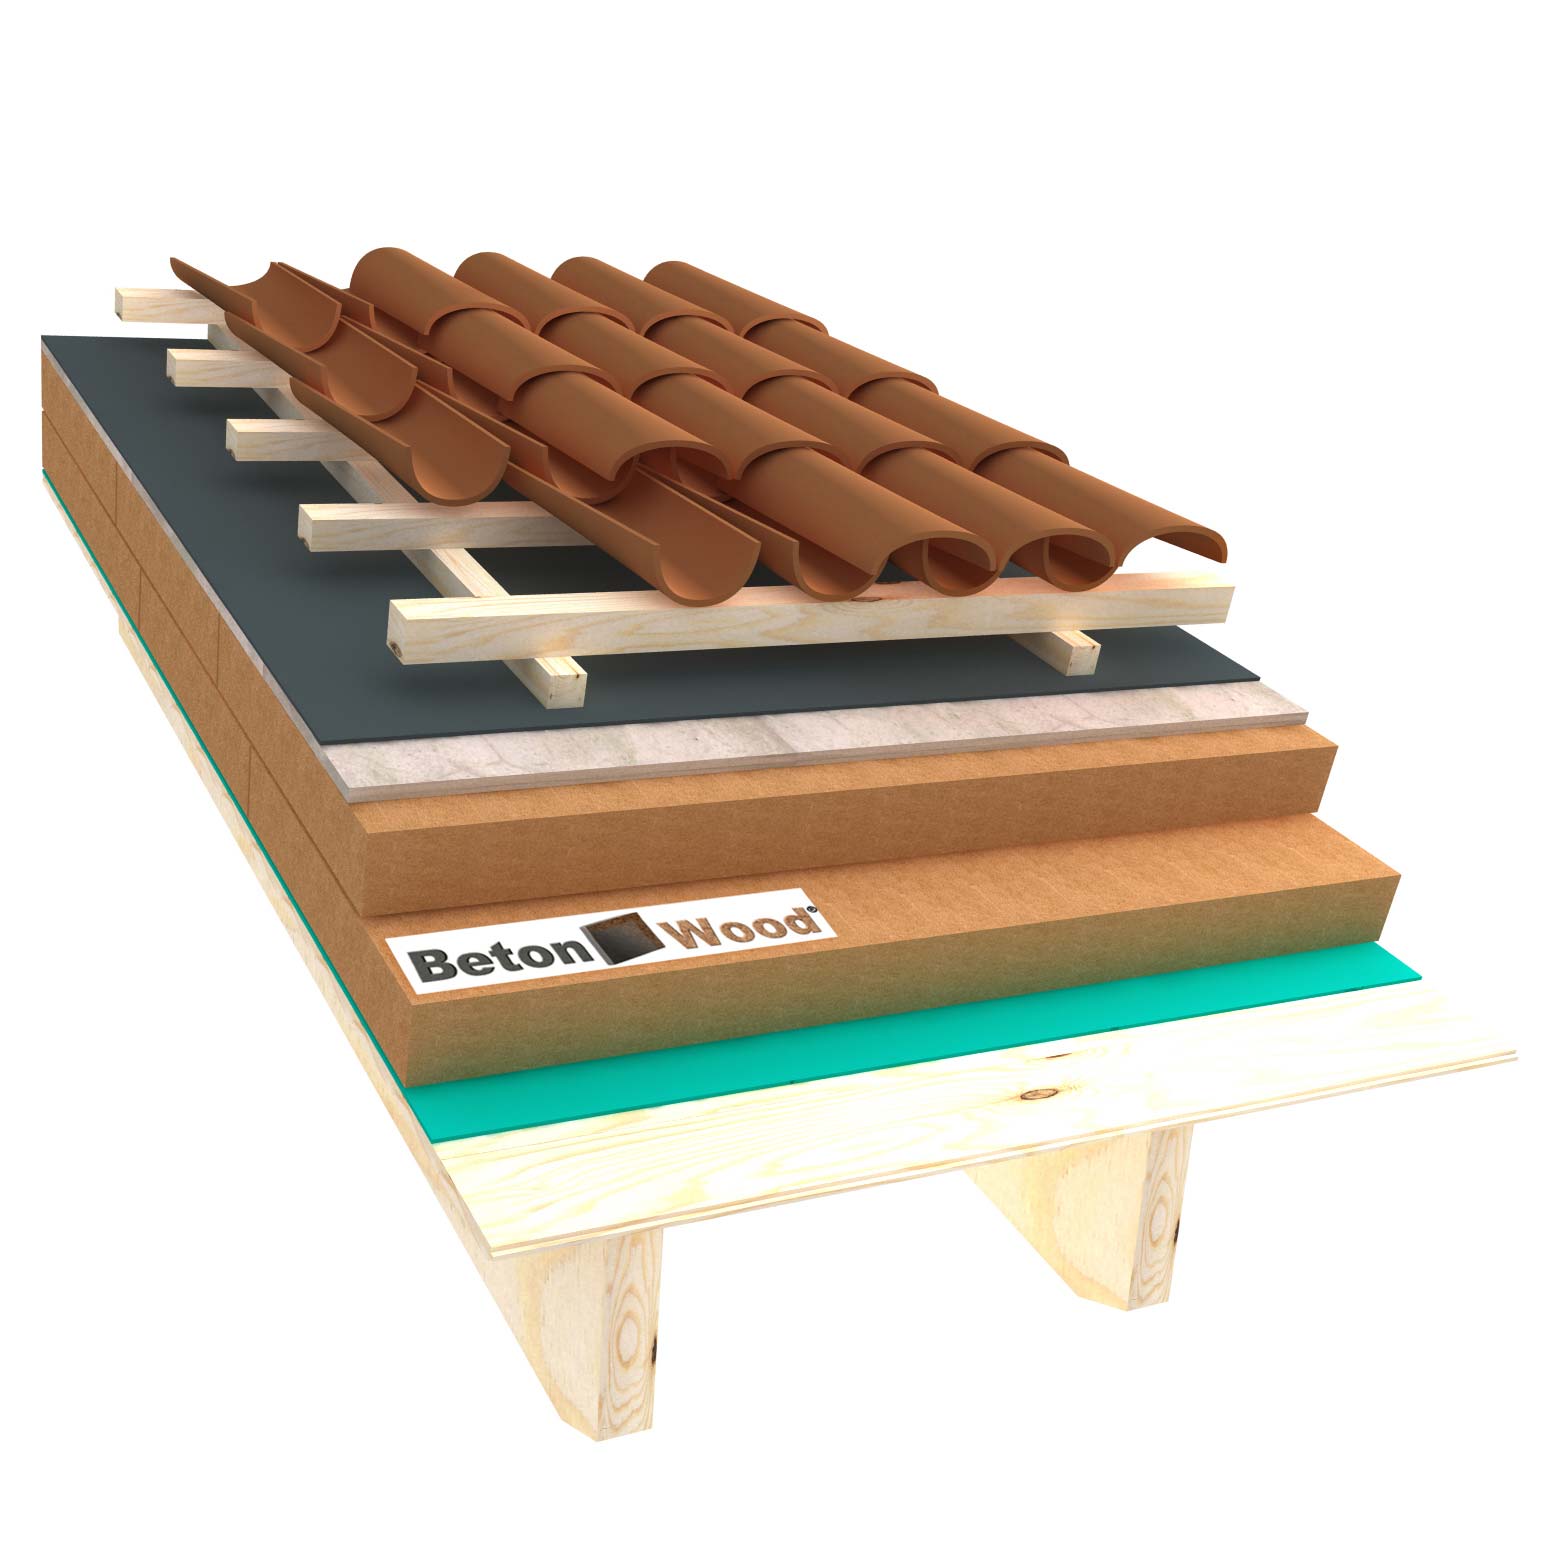 Ventilated roof with wood fiber Therm and cement bonded particle boards on matchboarding